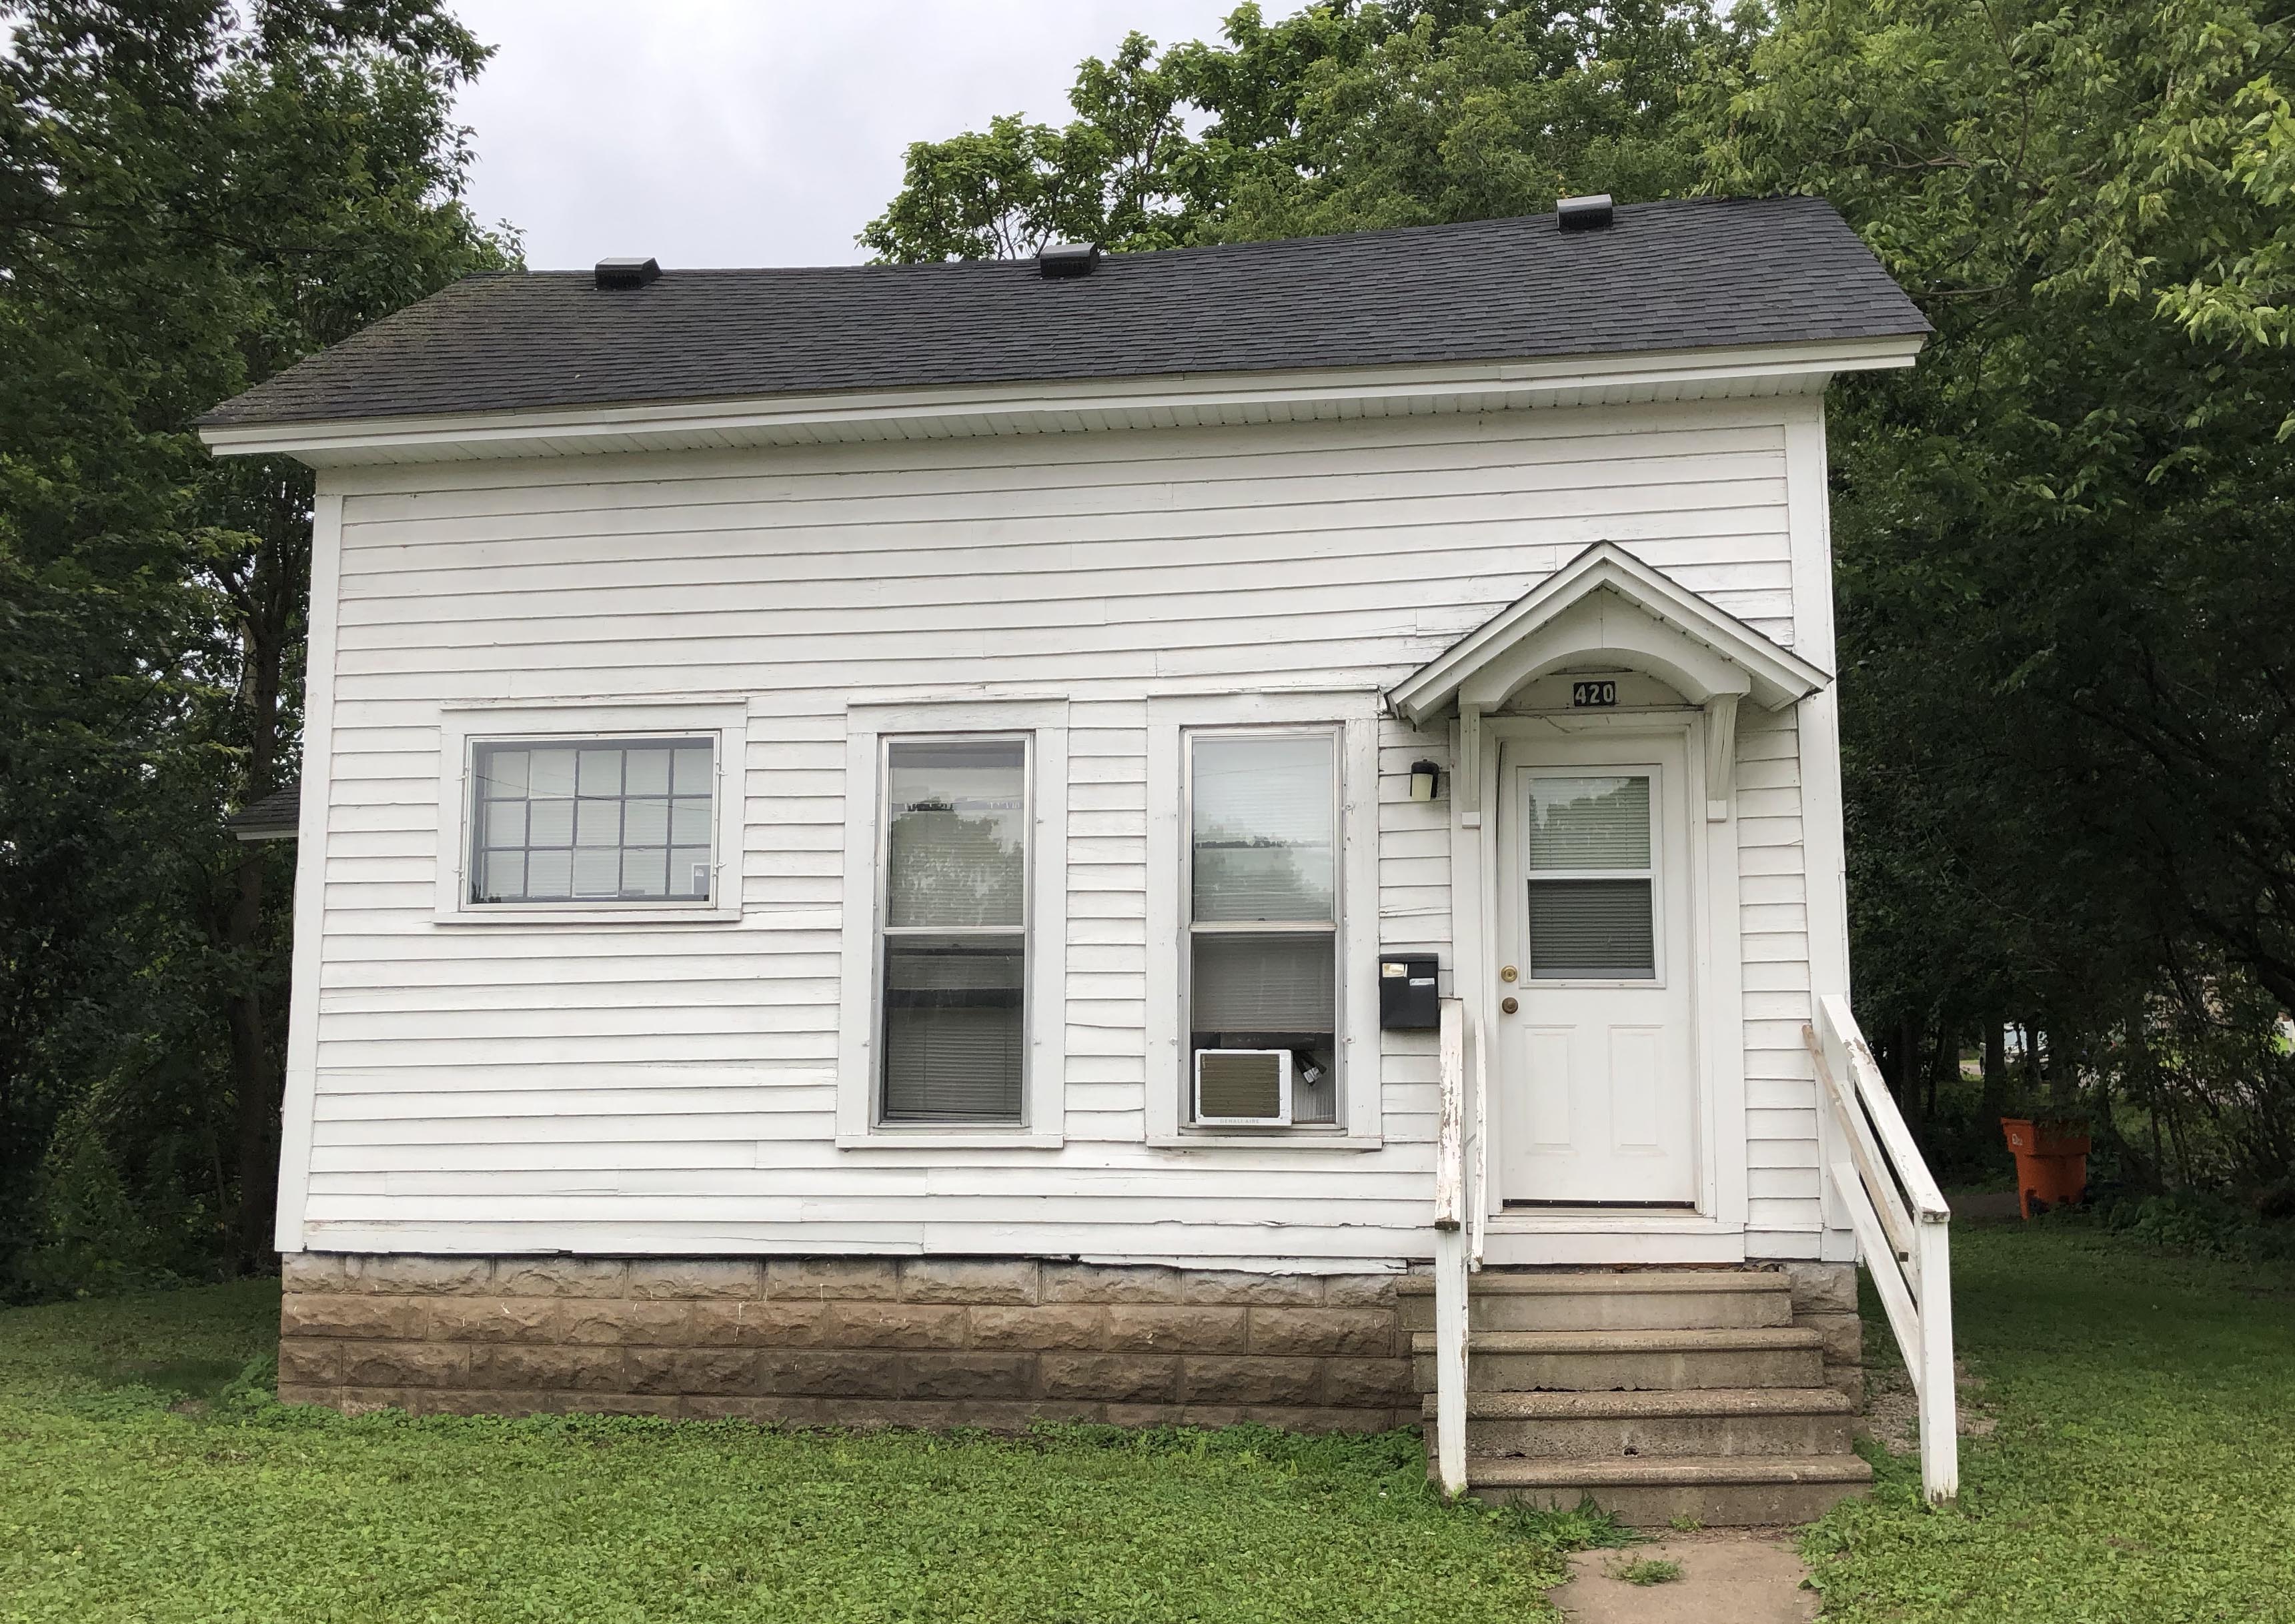 420 2nd Ave, Eau Claire, Wisconsin 54703, 3 Bedrooms Bedrooms, ,1 BathroomBathrooms,Single Family,Apartment,420 2nd Ave,1064